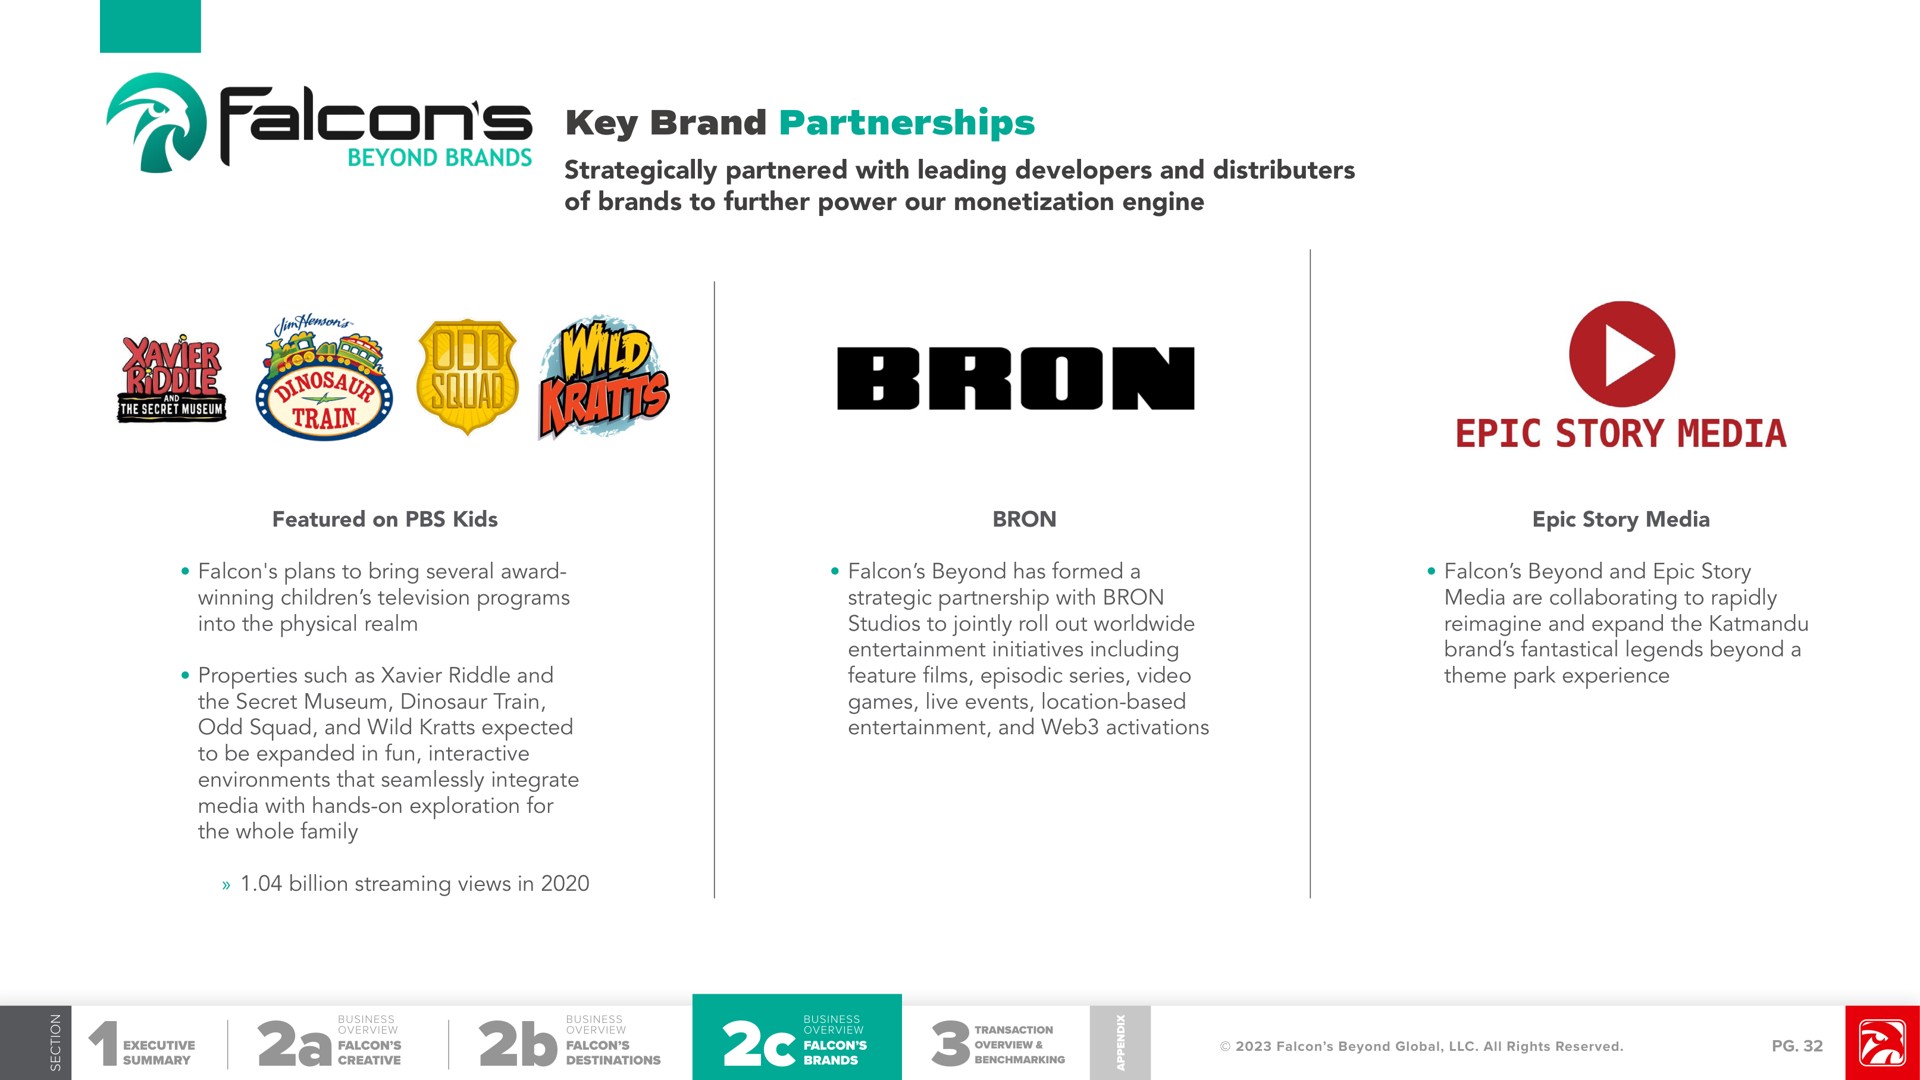 key brand partnerships strategically partnered with leading developers and distributers of brands to further power our monetization engine he falcons epic story media | Falcon's Beyond